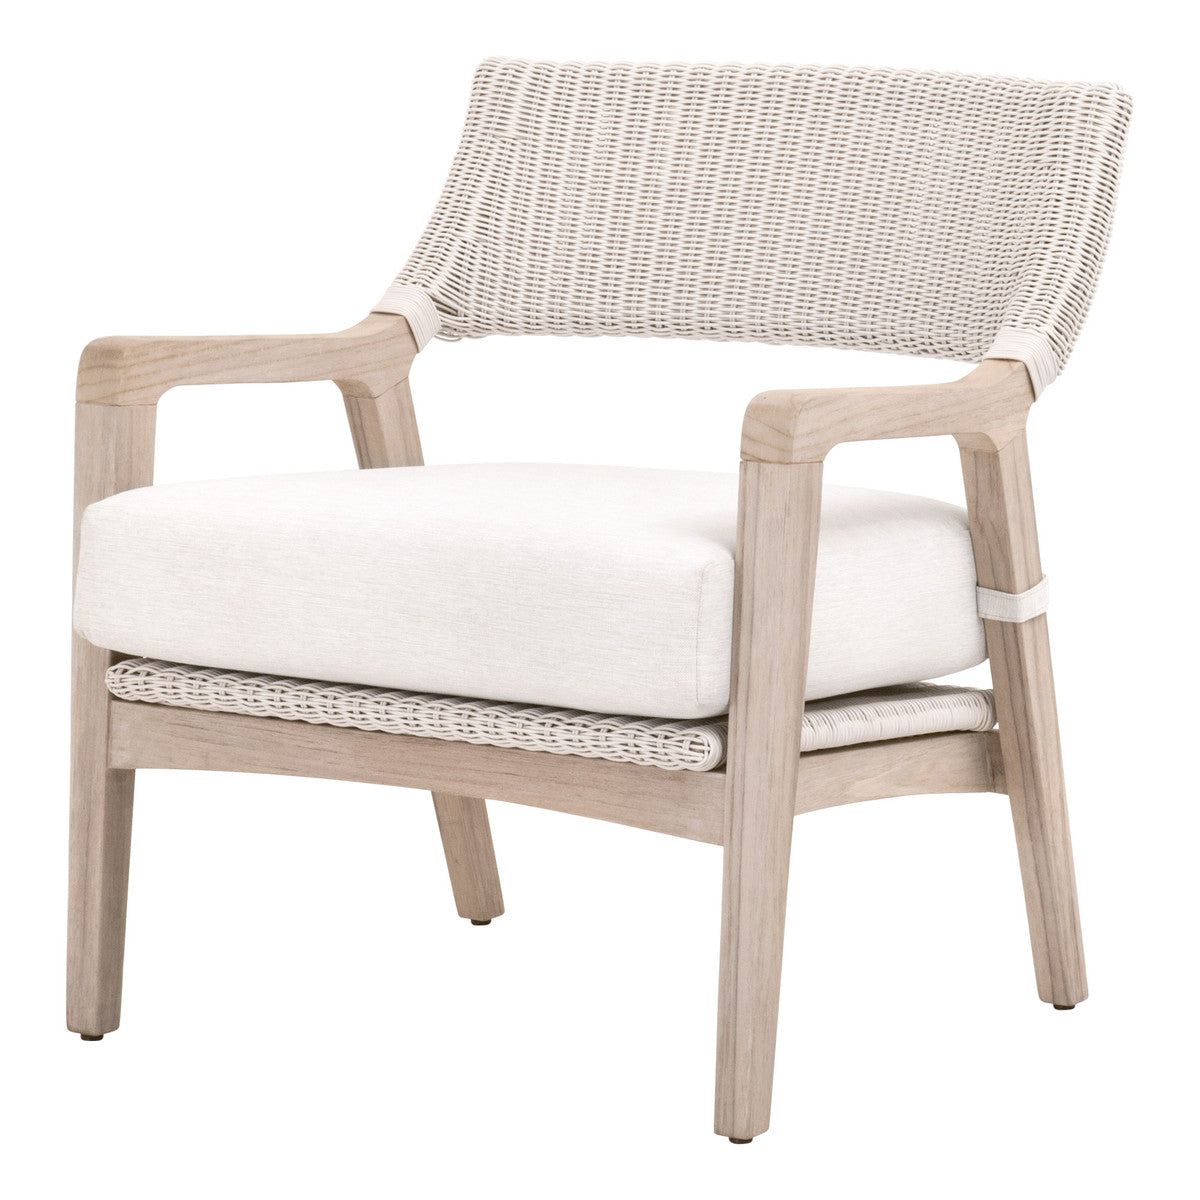 Lucia Outdoor Club Chair-Club Chairs-Essentials For Living-Sideboards and Things